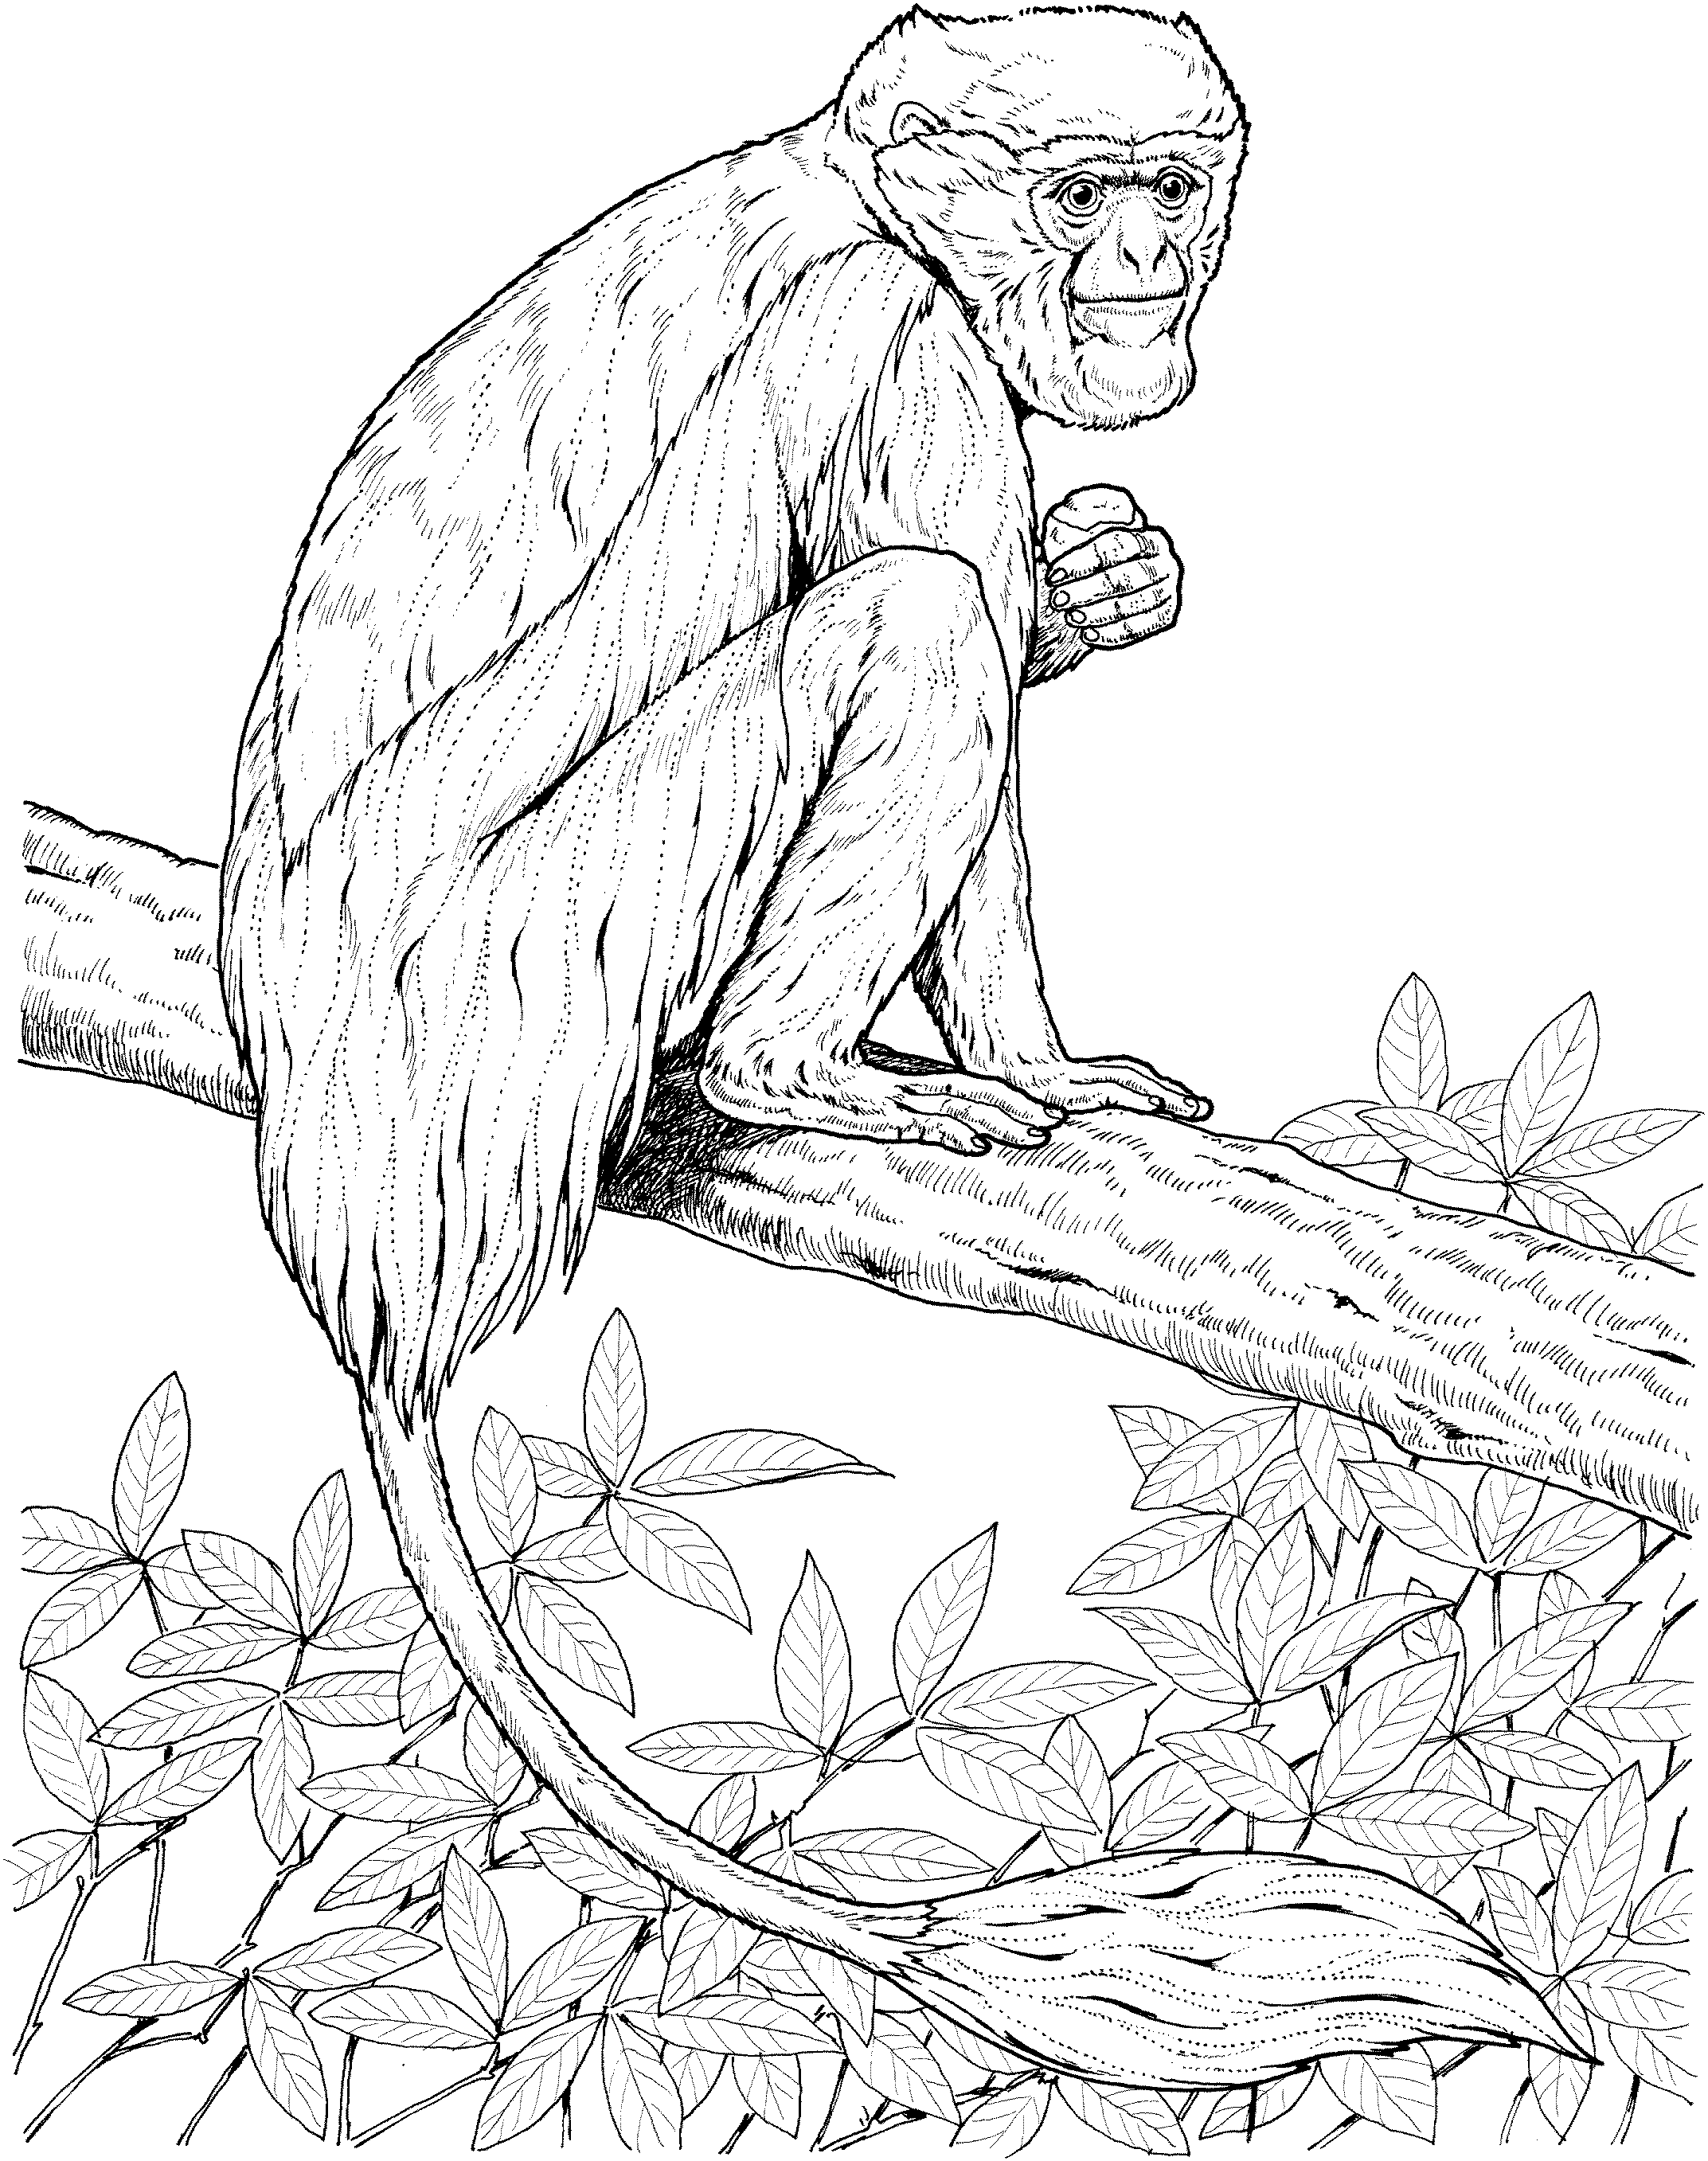 Colobus Monkey  coloring #2, Download drawings